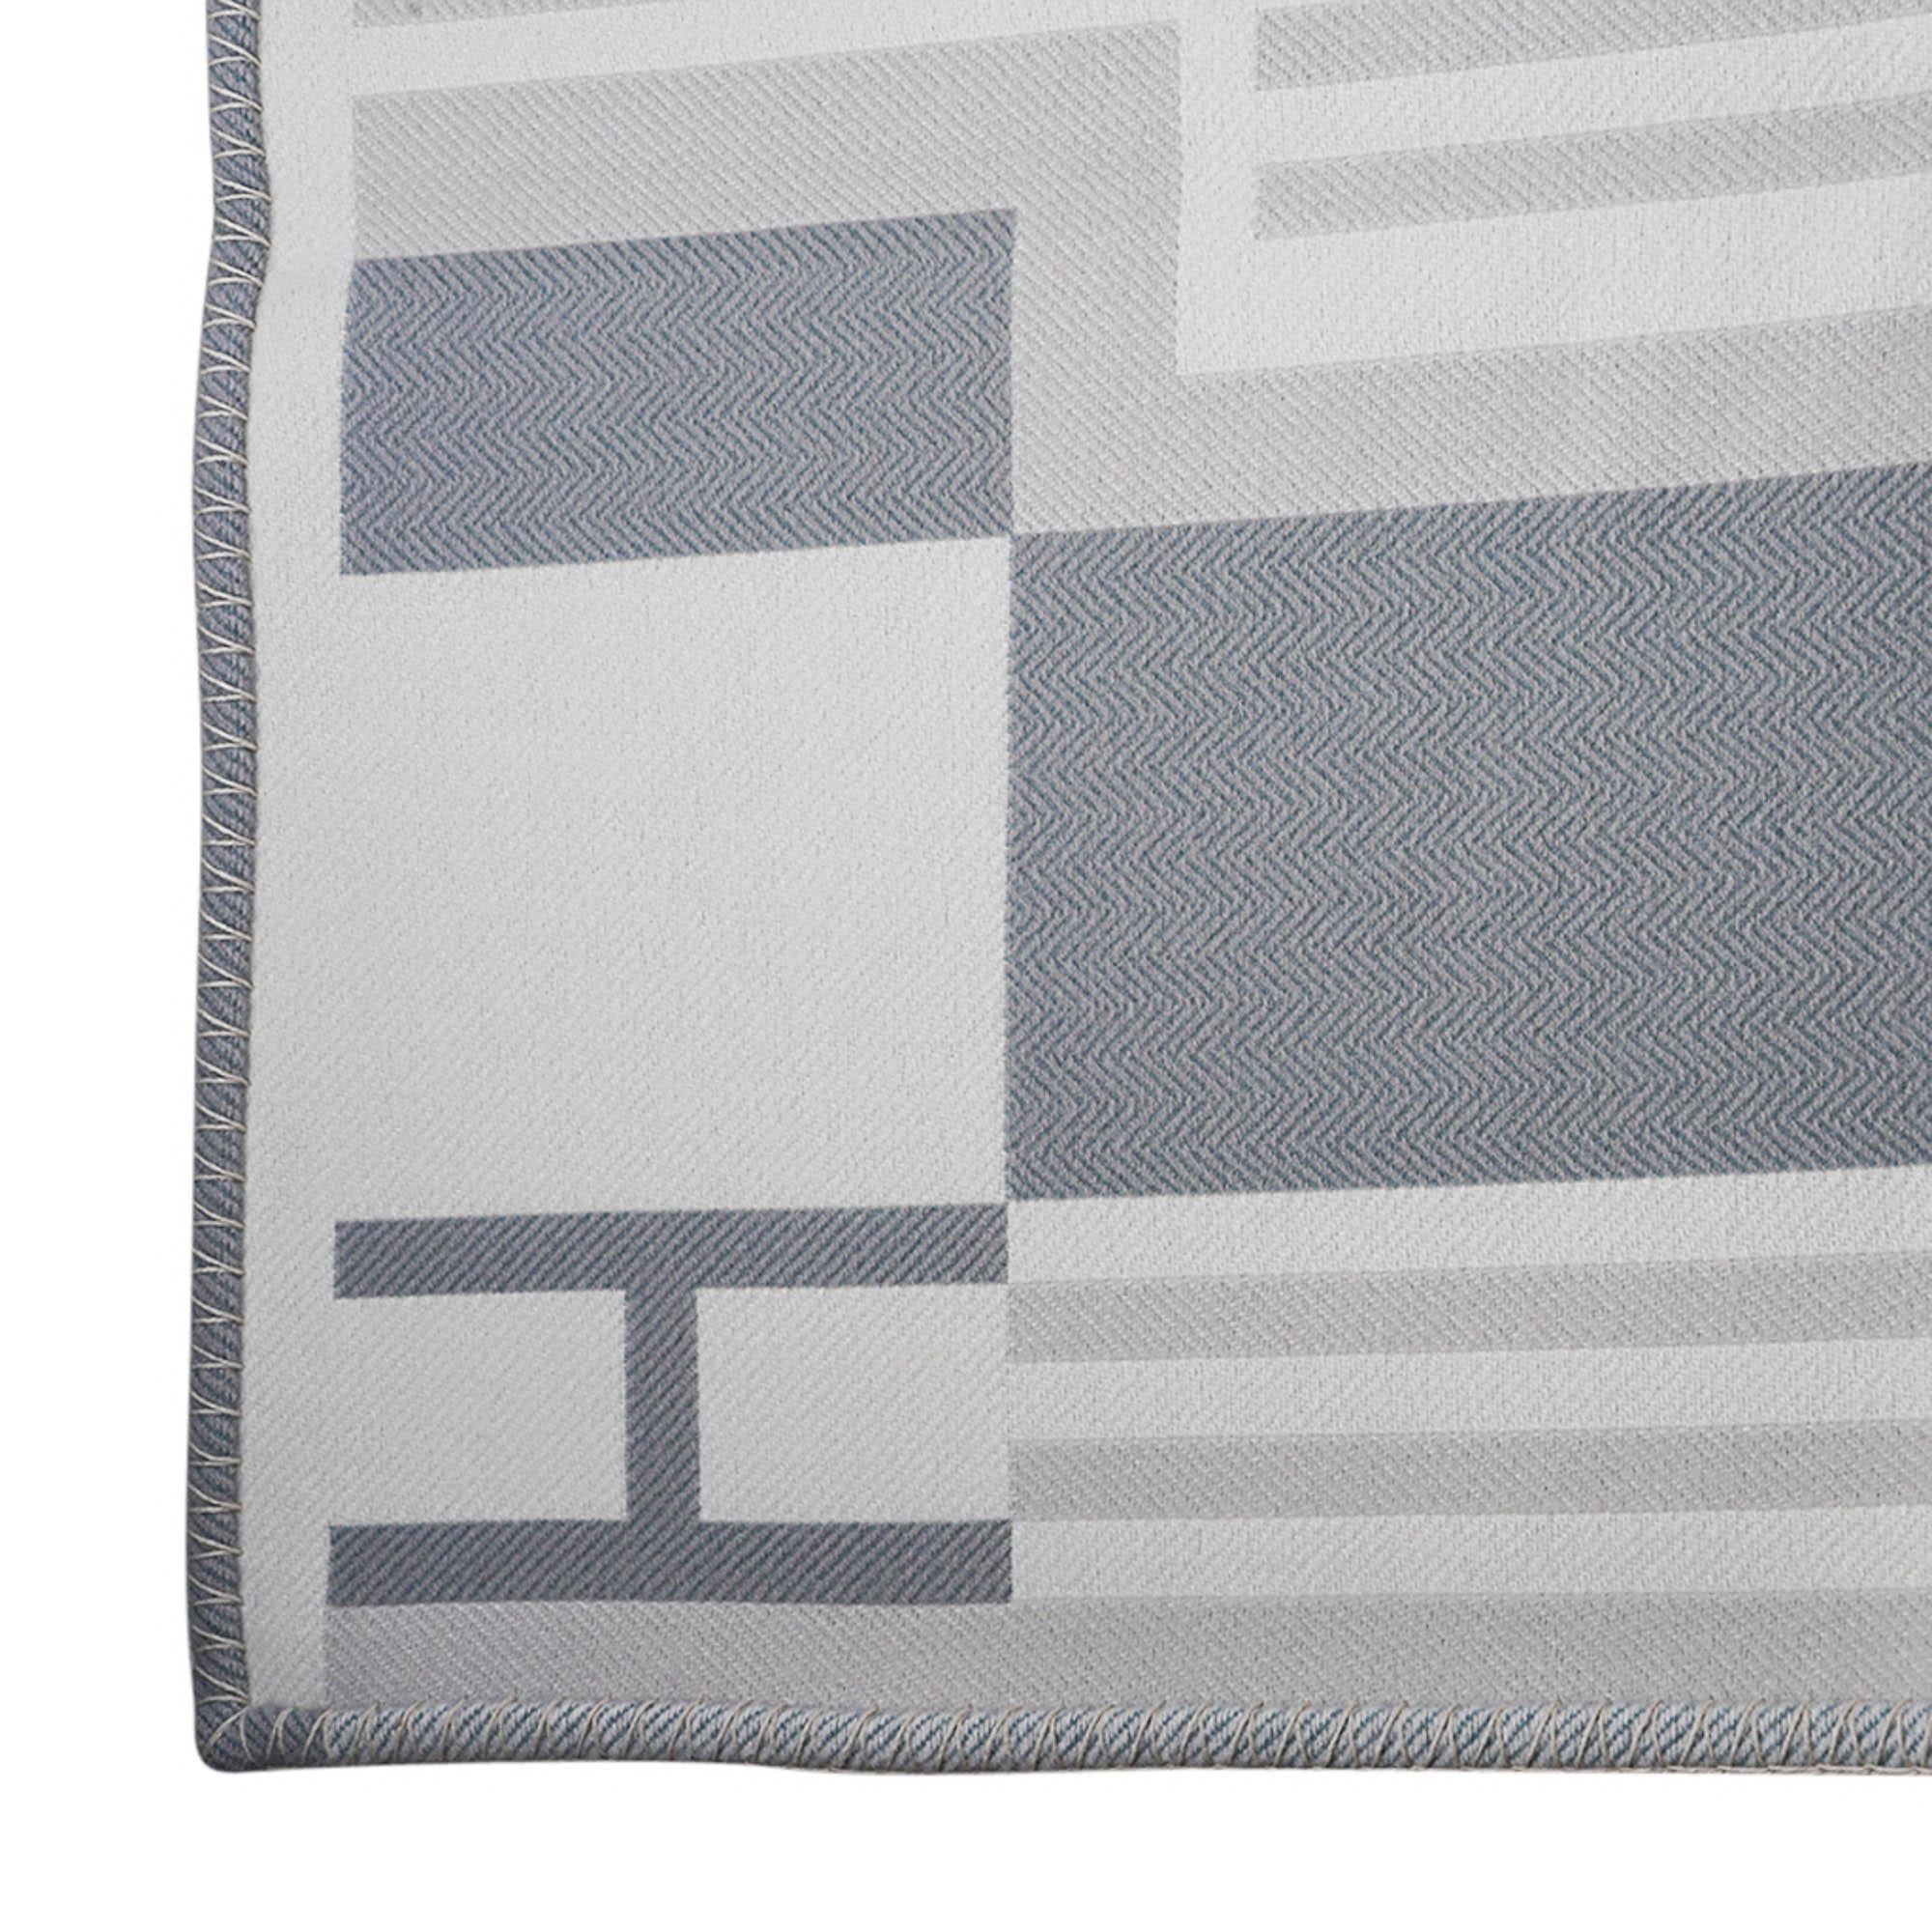 Hermes Ithaque Blanket Gris Perle Wool and Cashmere 3